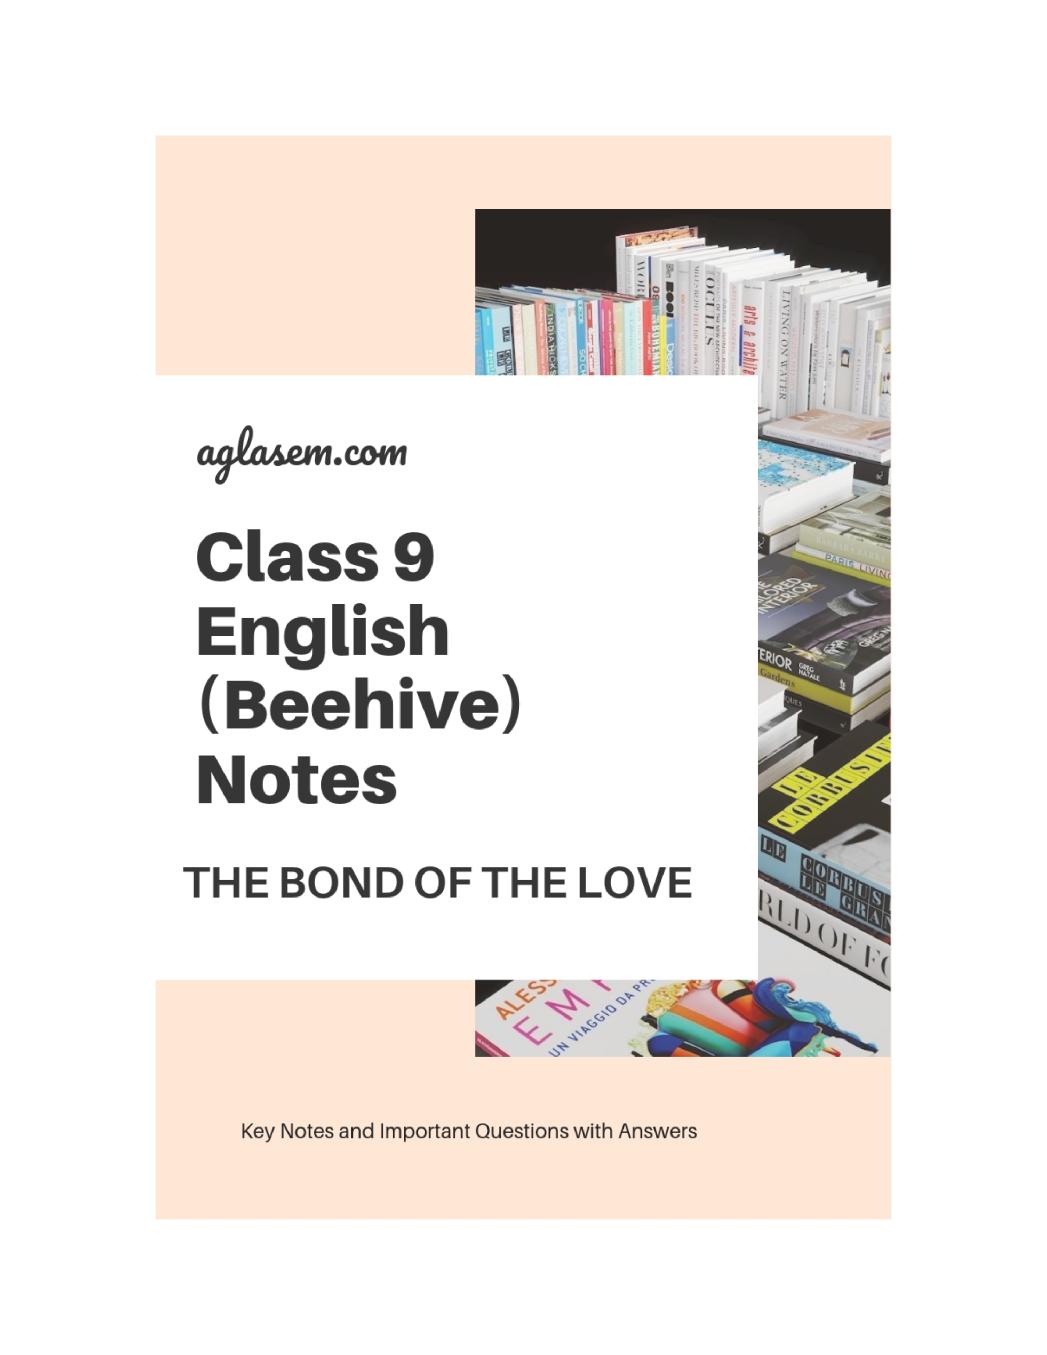 Class 9 English Beehive Notes For The Bond of the Love - Page 1